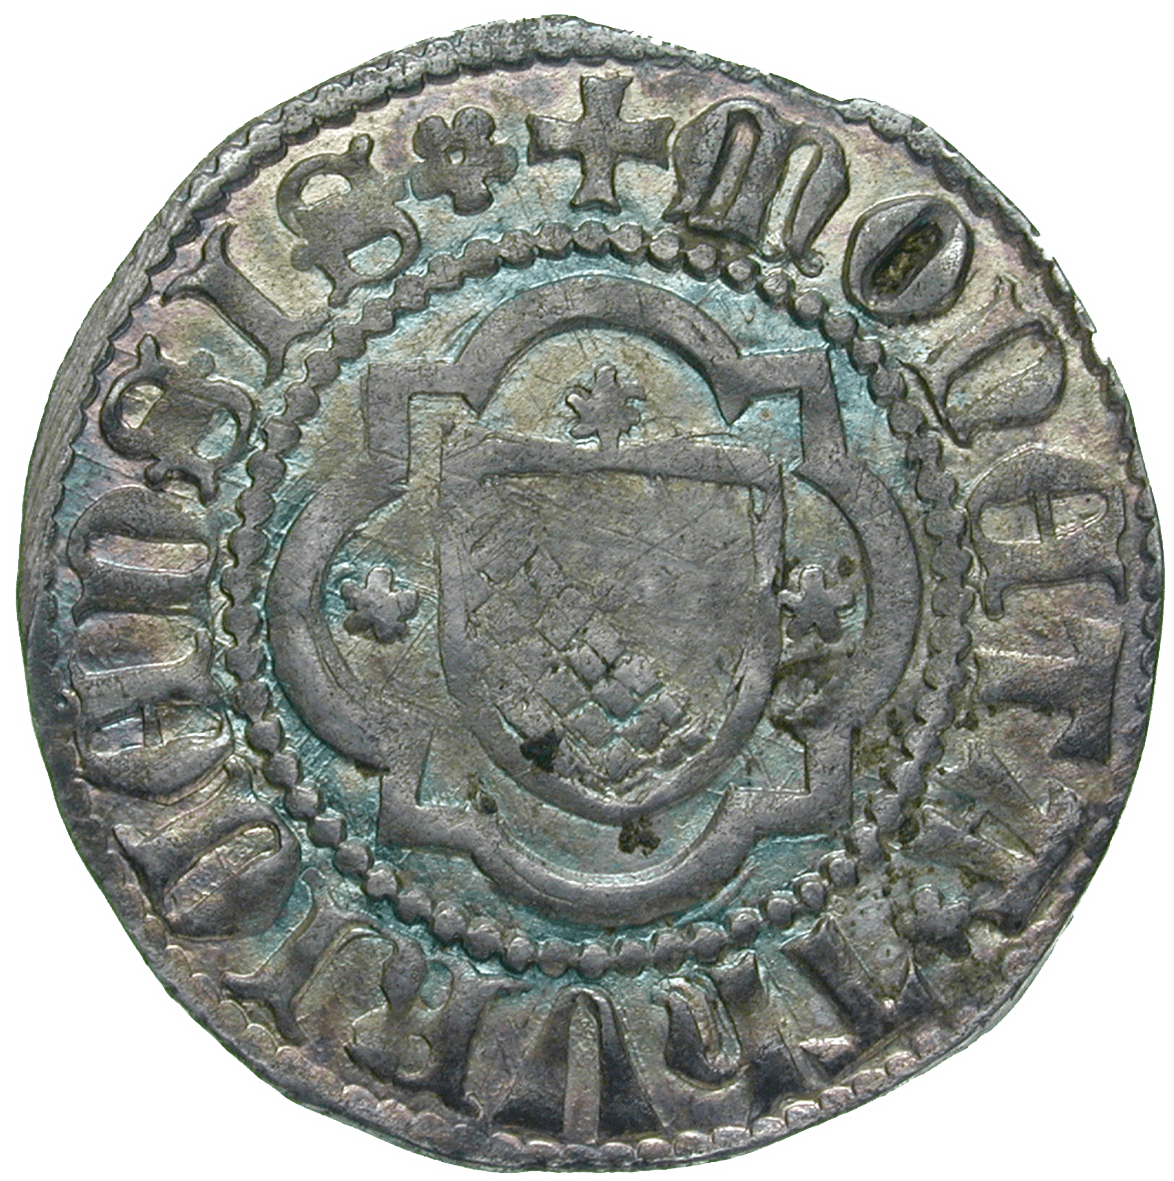 Holy Roman Empire, City of Zurich, Plappart (obverse)